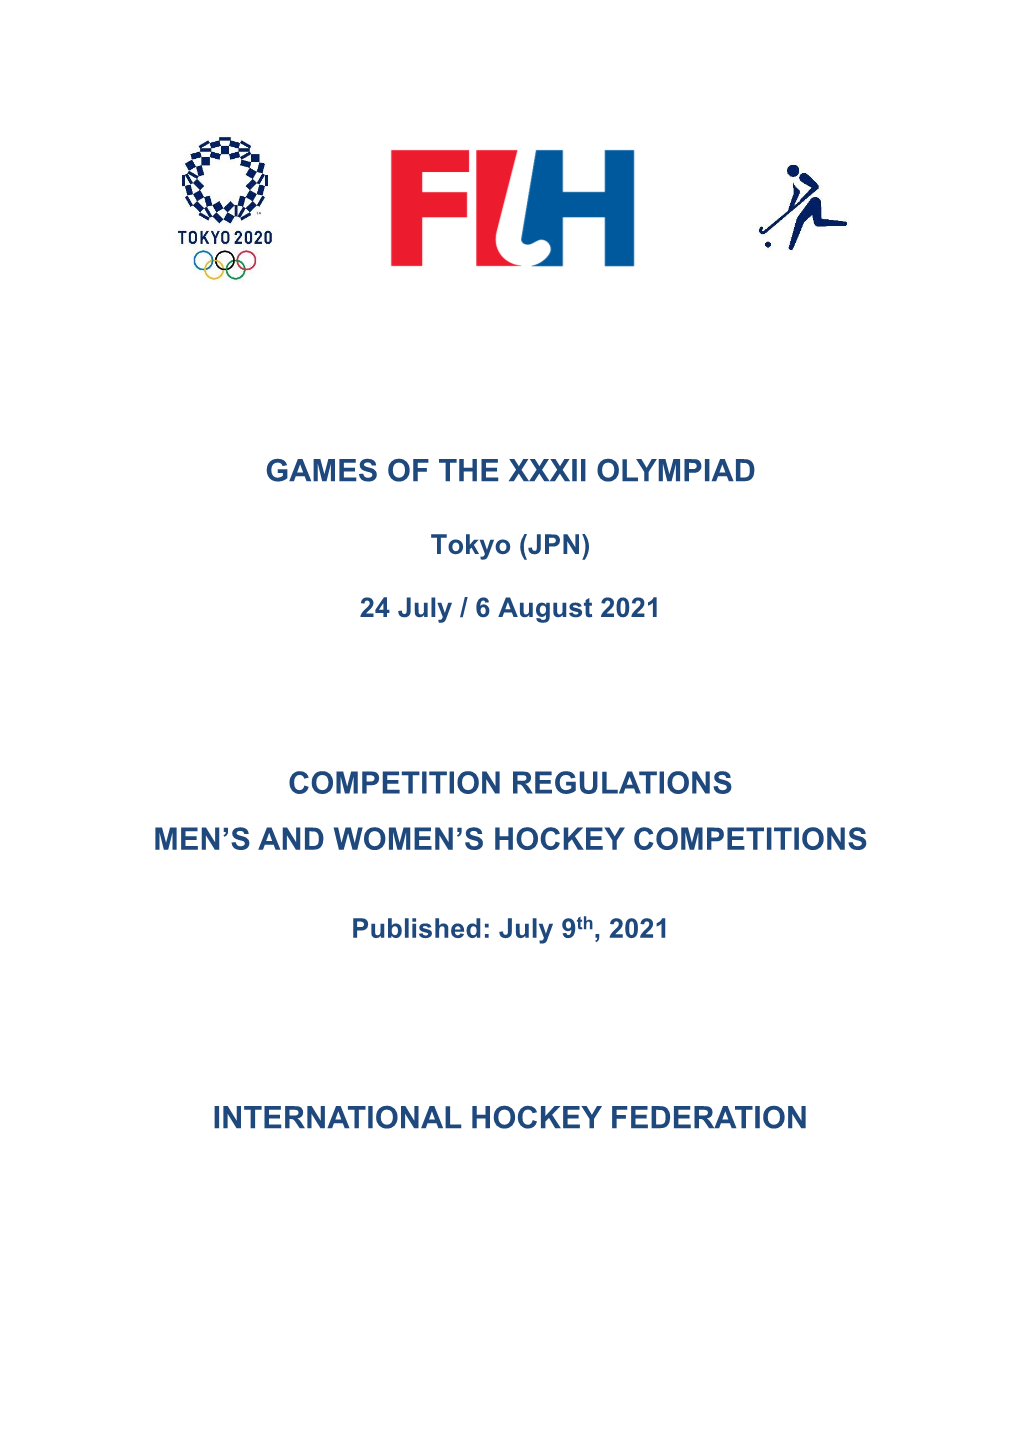 Games of the Xxxii Olympiad Competition Regulations